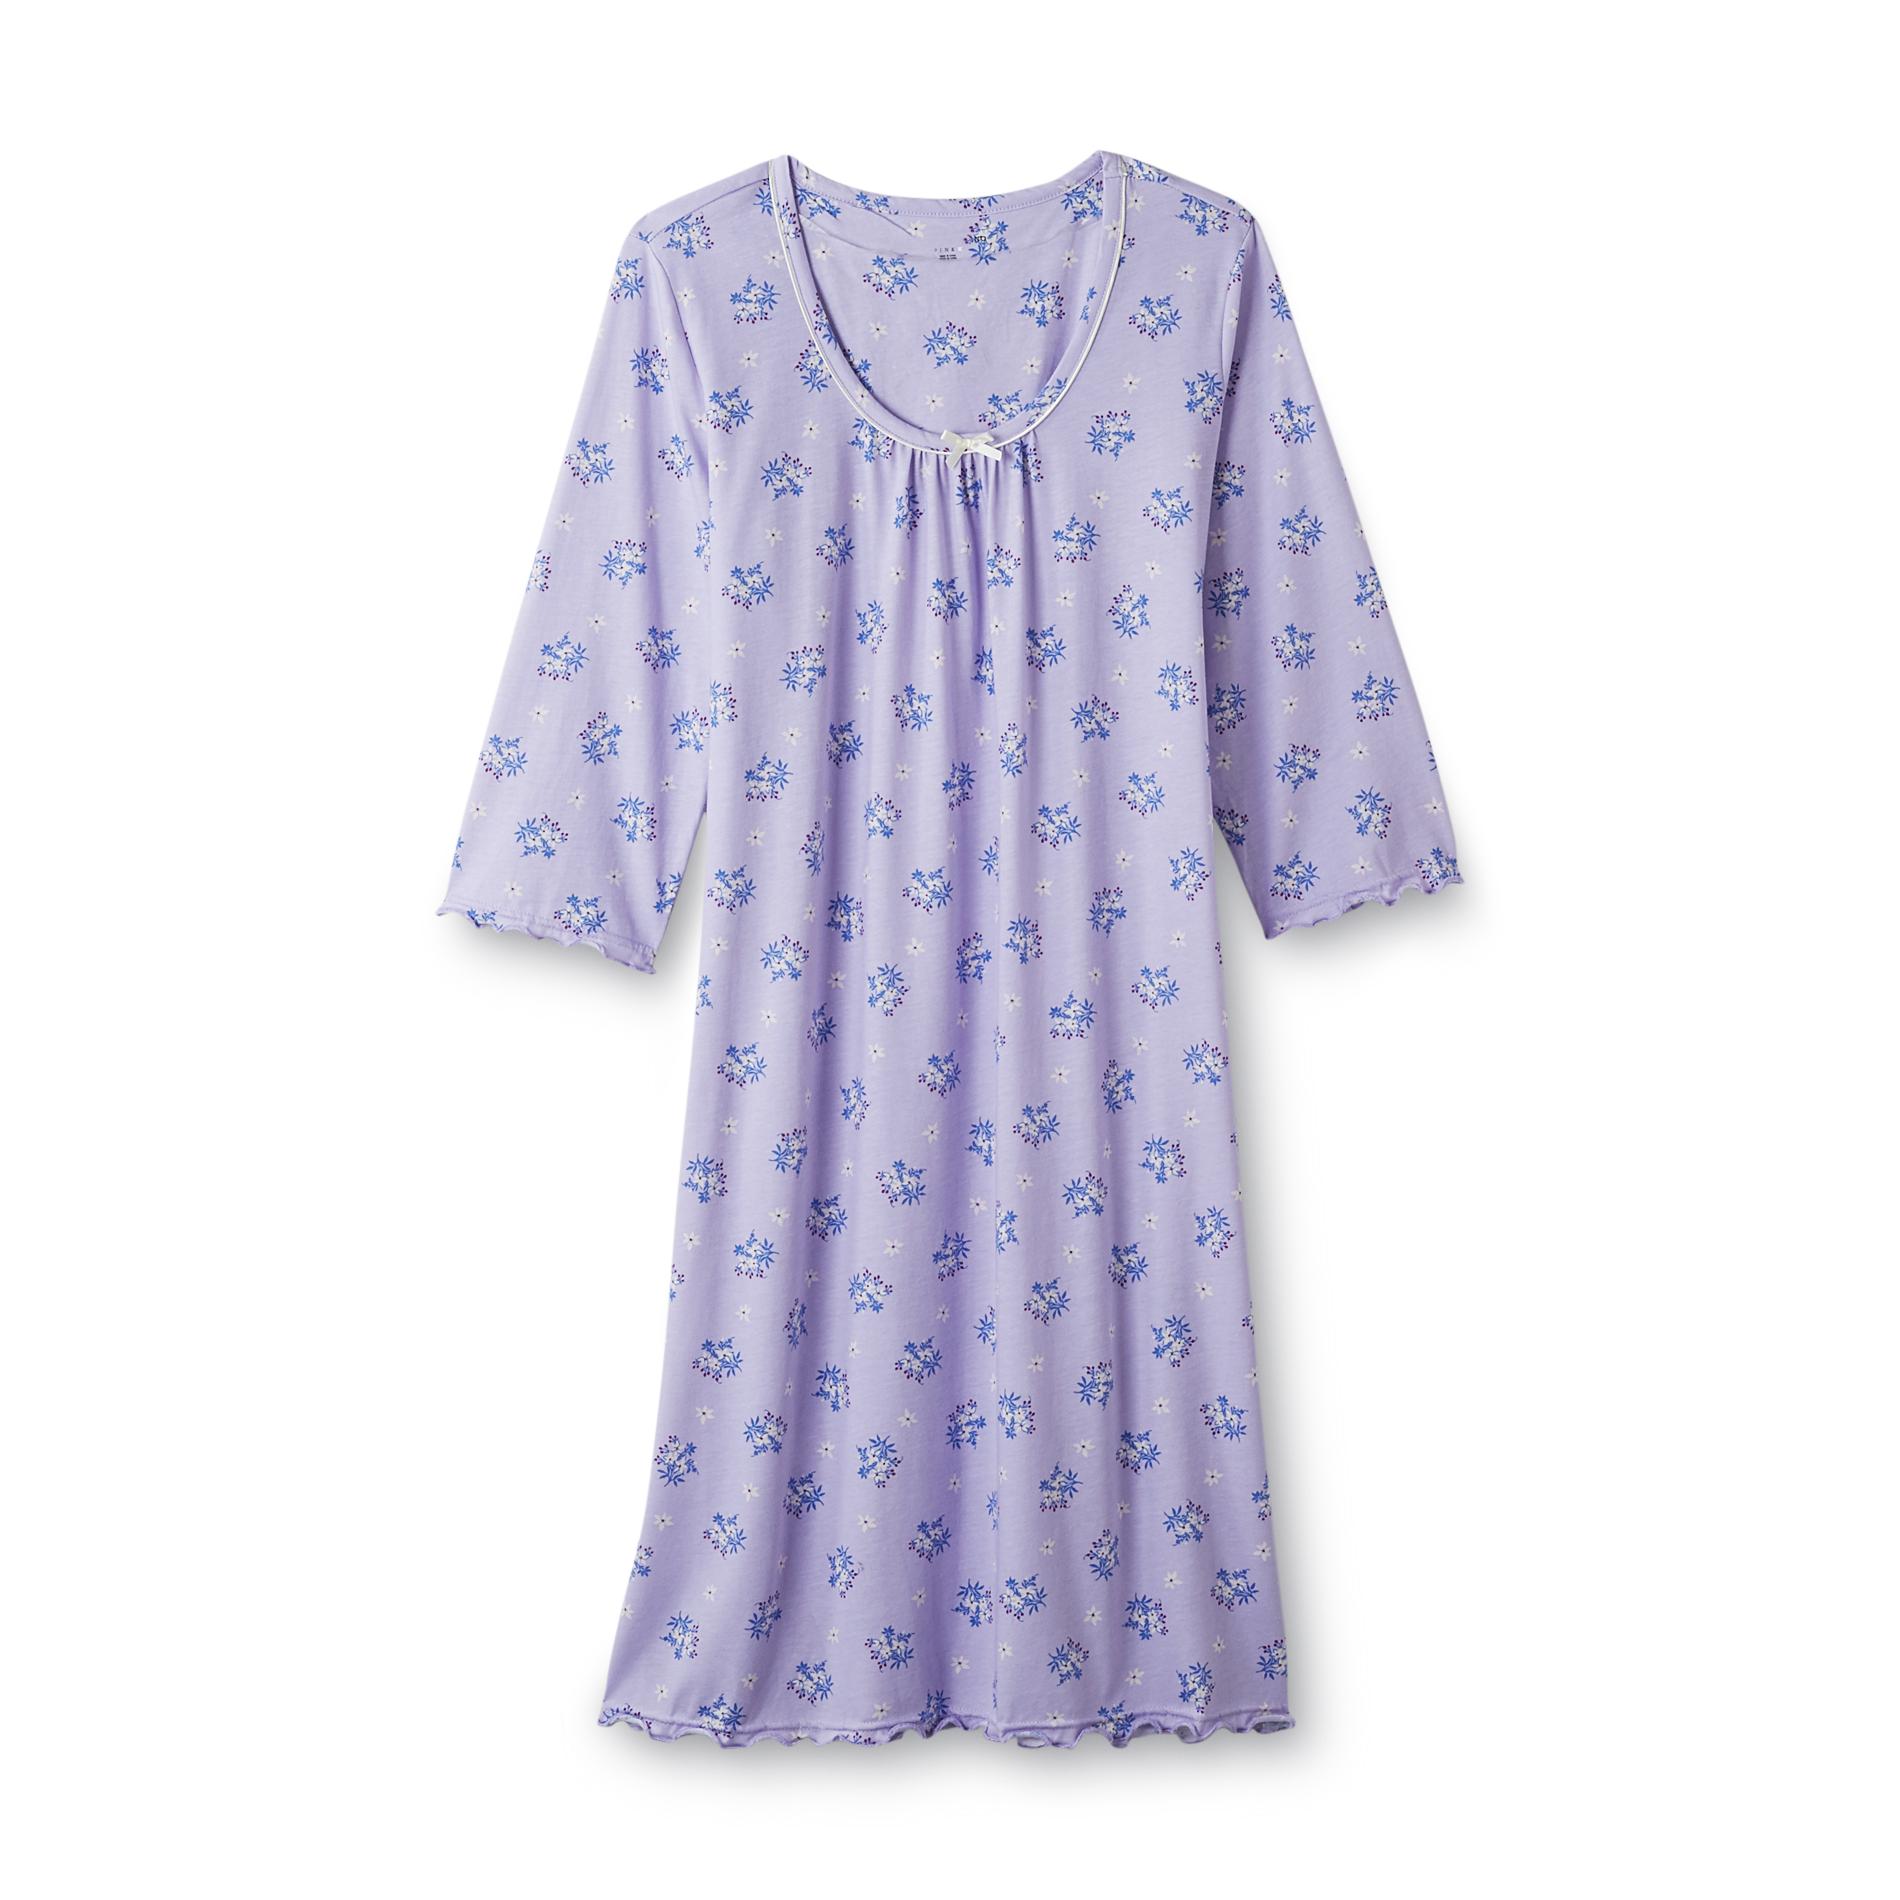 Pink K Women's Nightgown - Floral Print